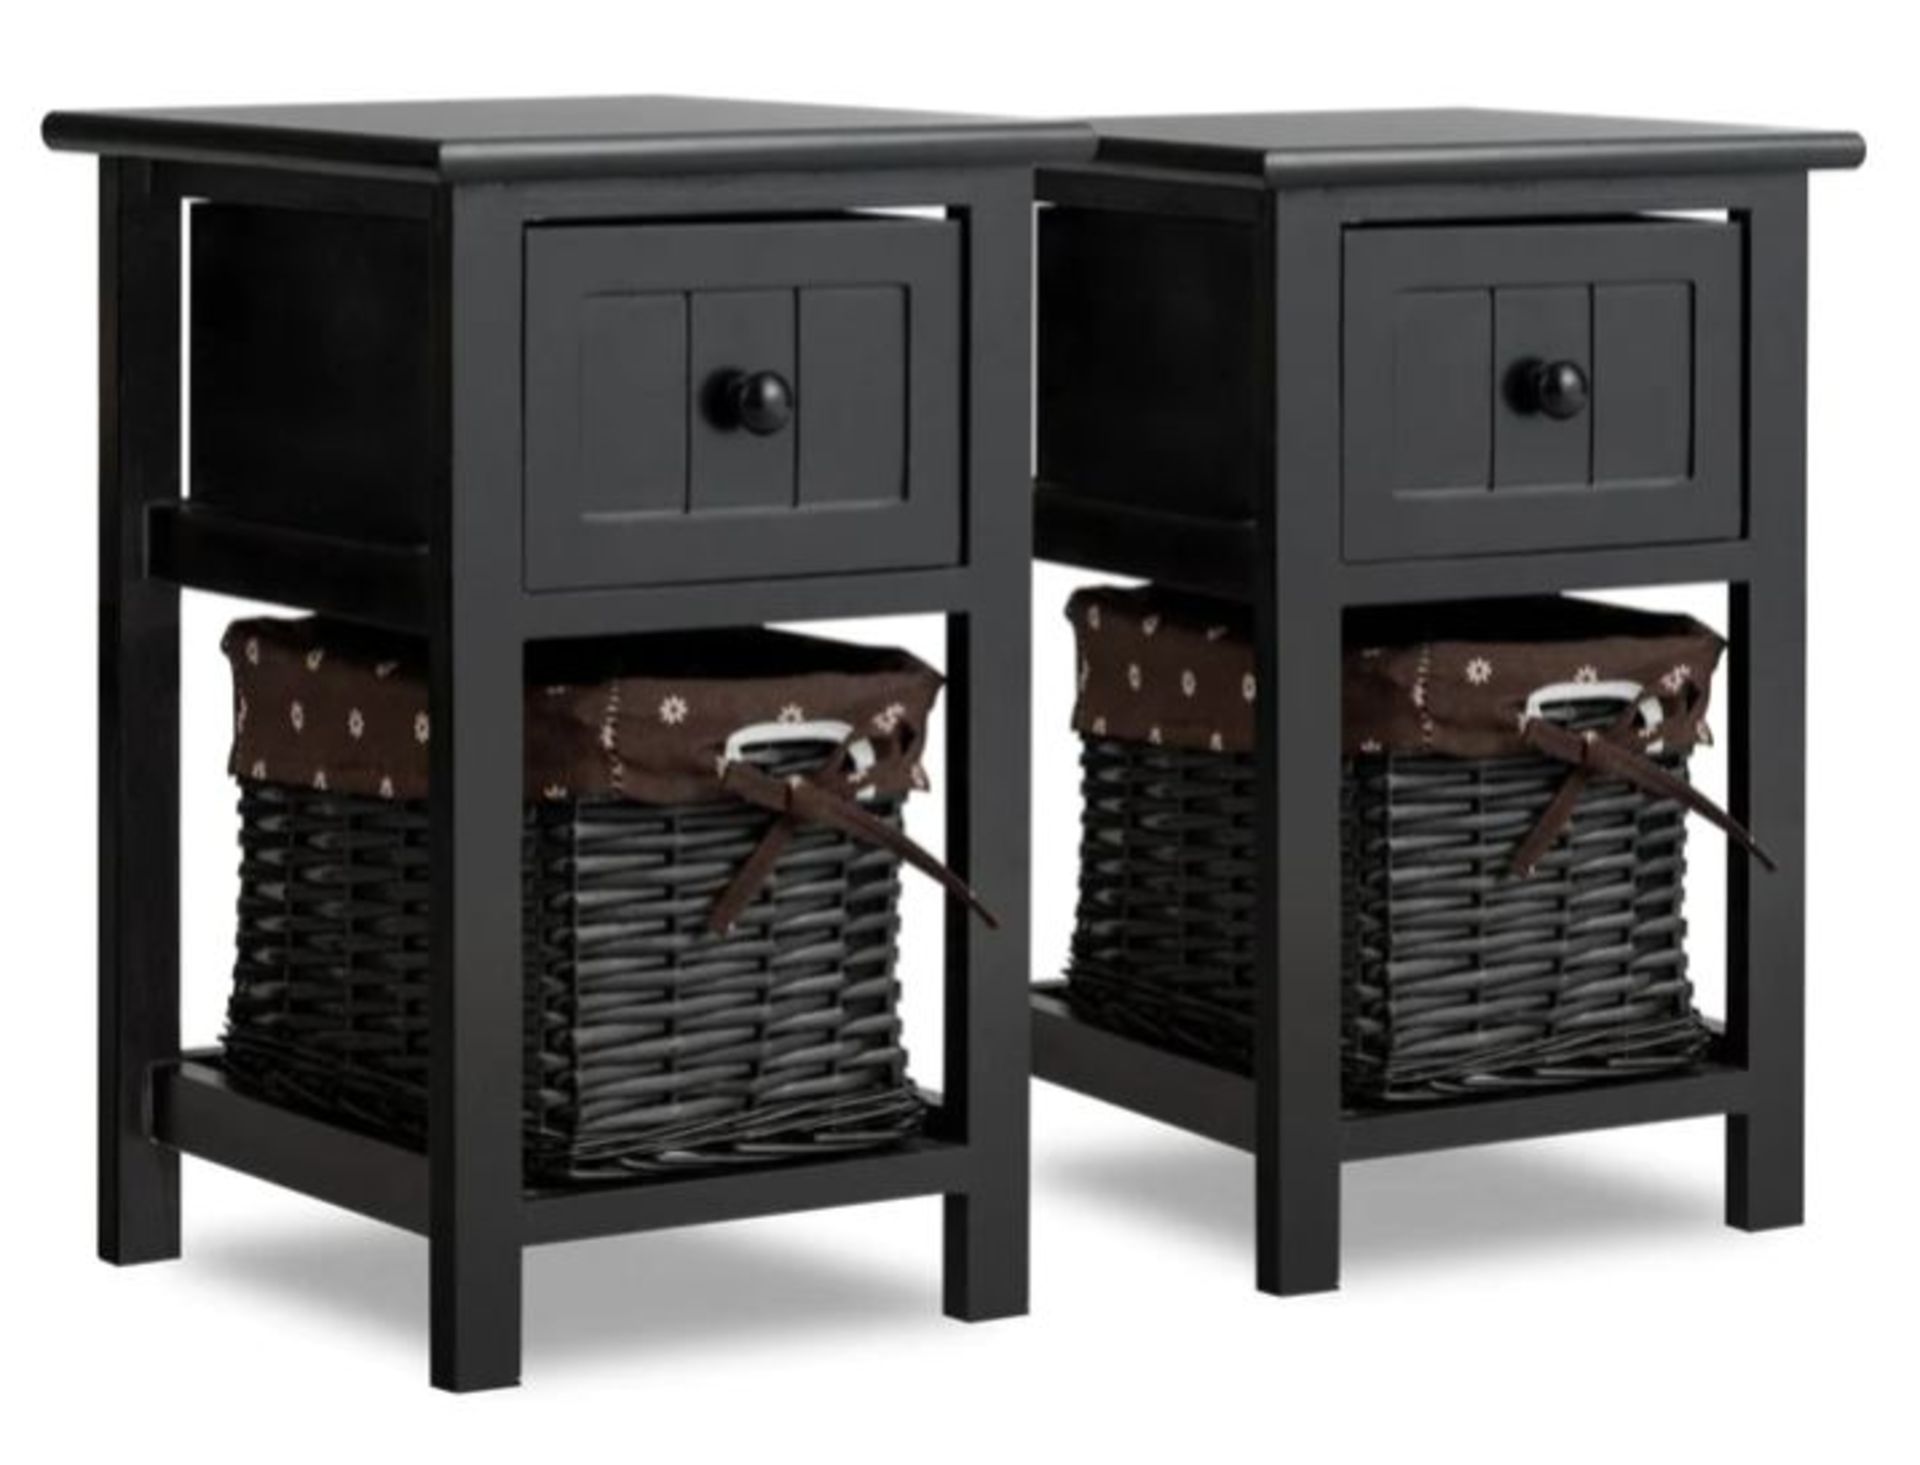 2 TIERS WOOD NIGHTSTAND WITH 1 DRAWER AND 1 BASKETS FOR HOME-BLACK. - ER53.